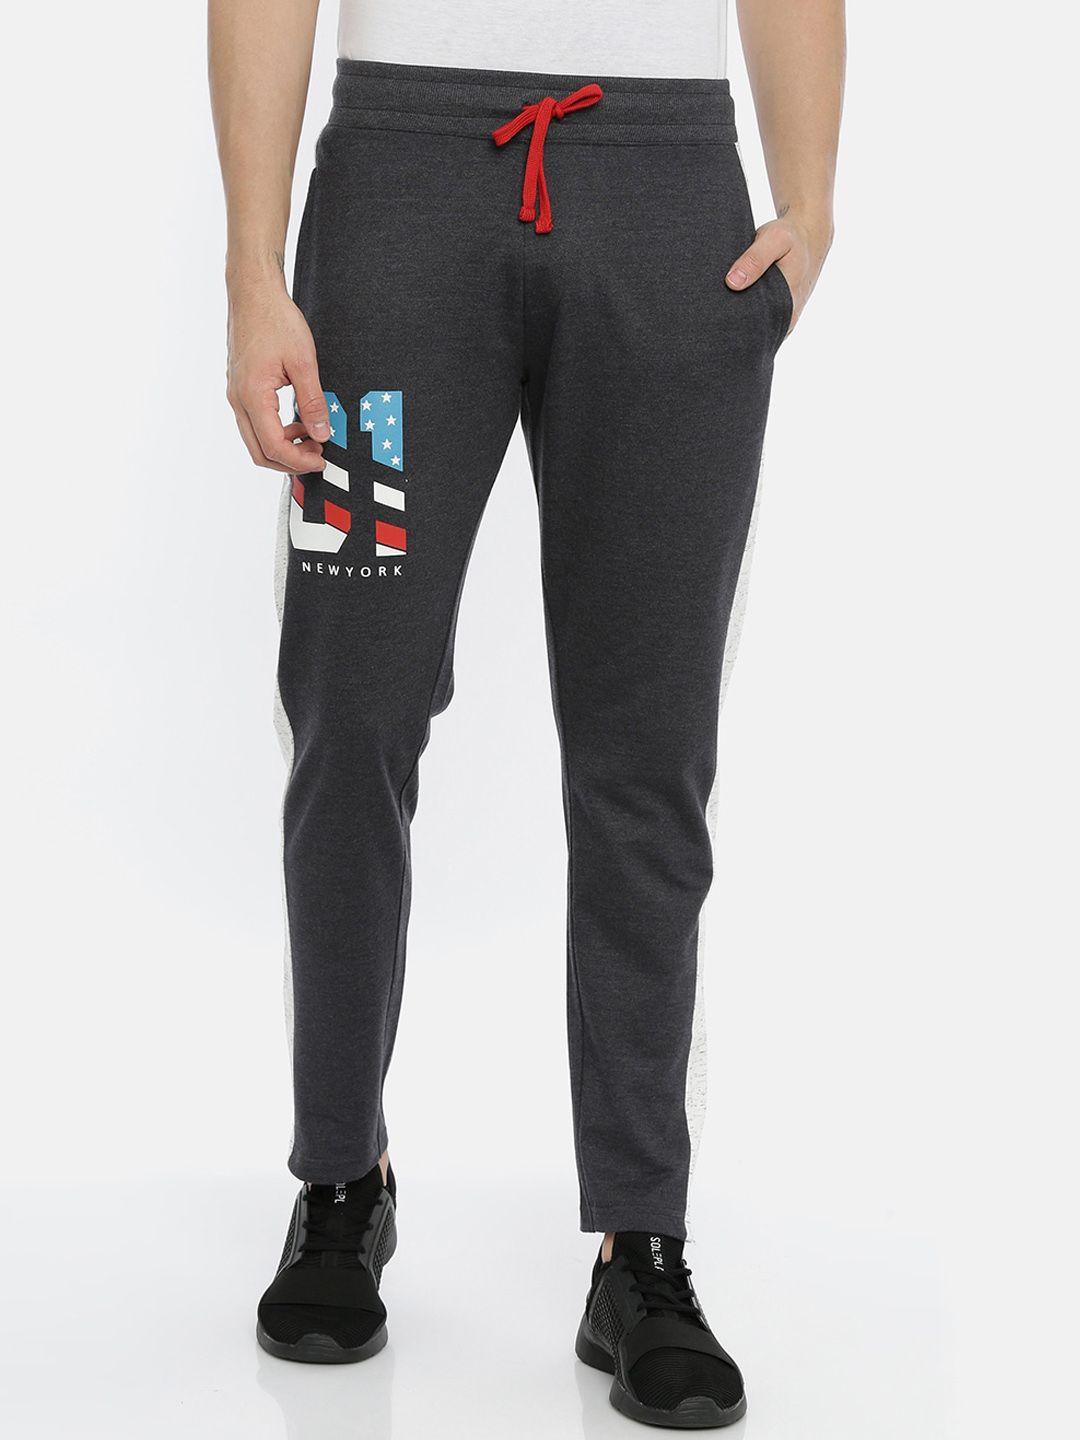 3pin men charcoal grey & white solid cotton track pants